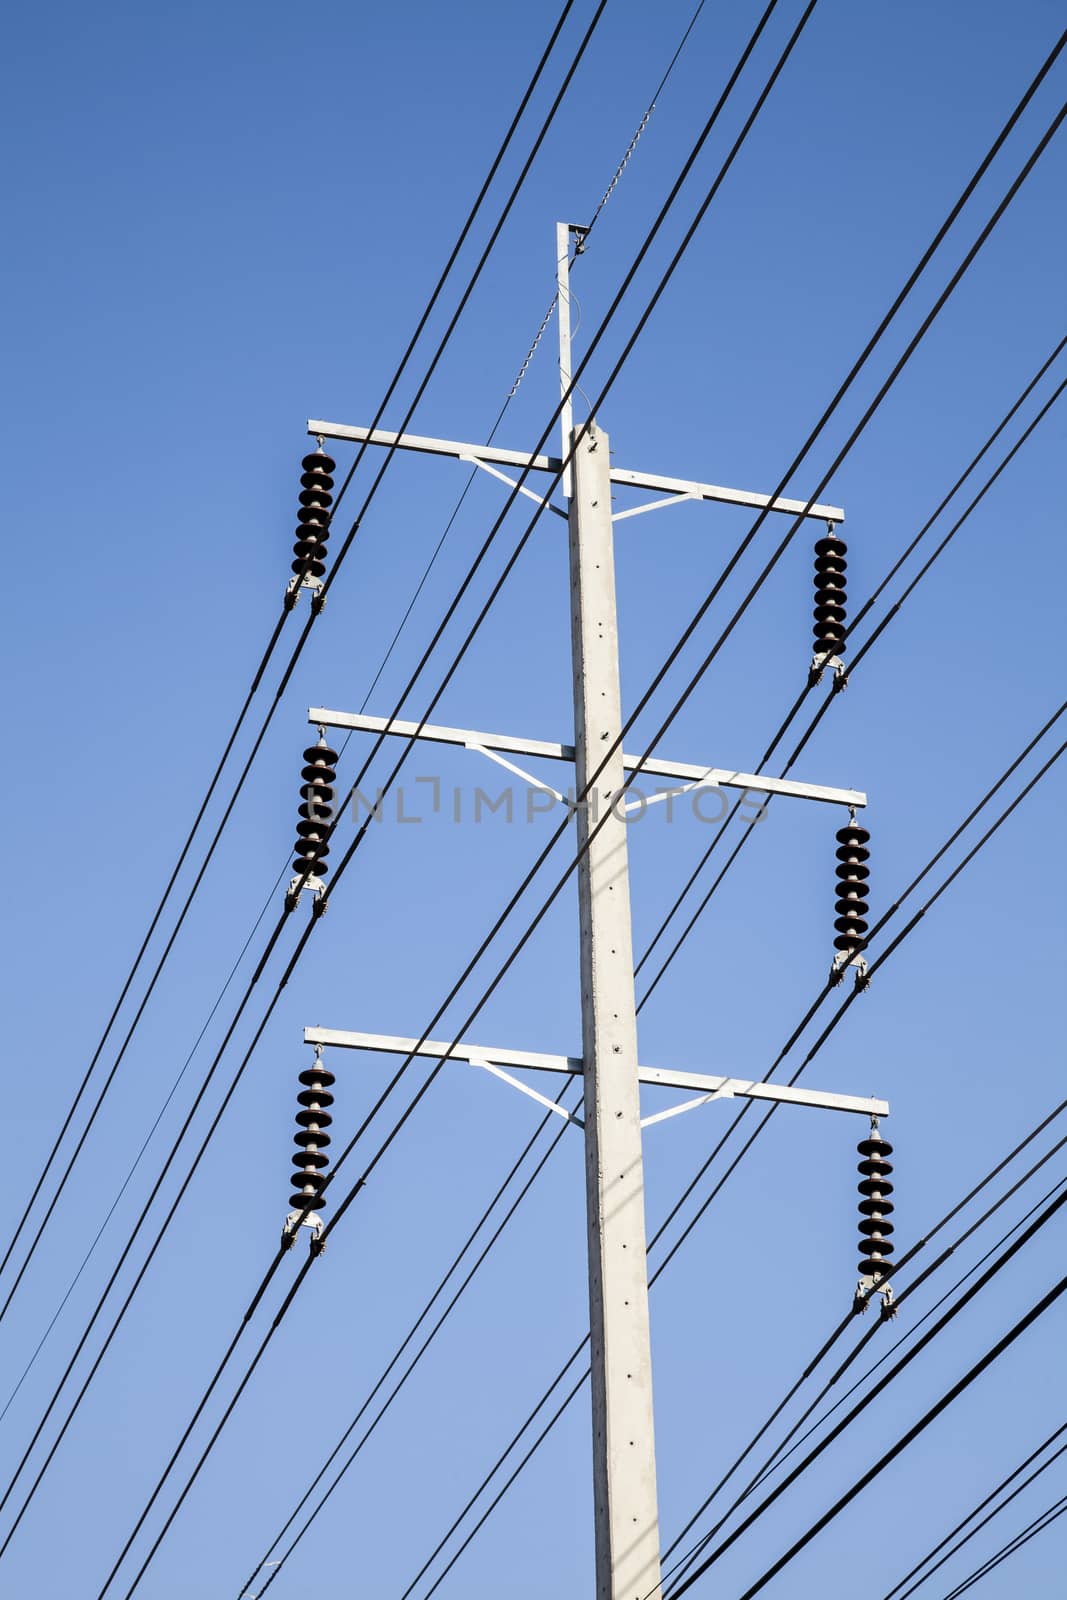 Power pole on stand. Electrical wires on a pole on blue sky background. Electric supply of big city. Land communications.